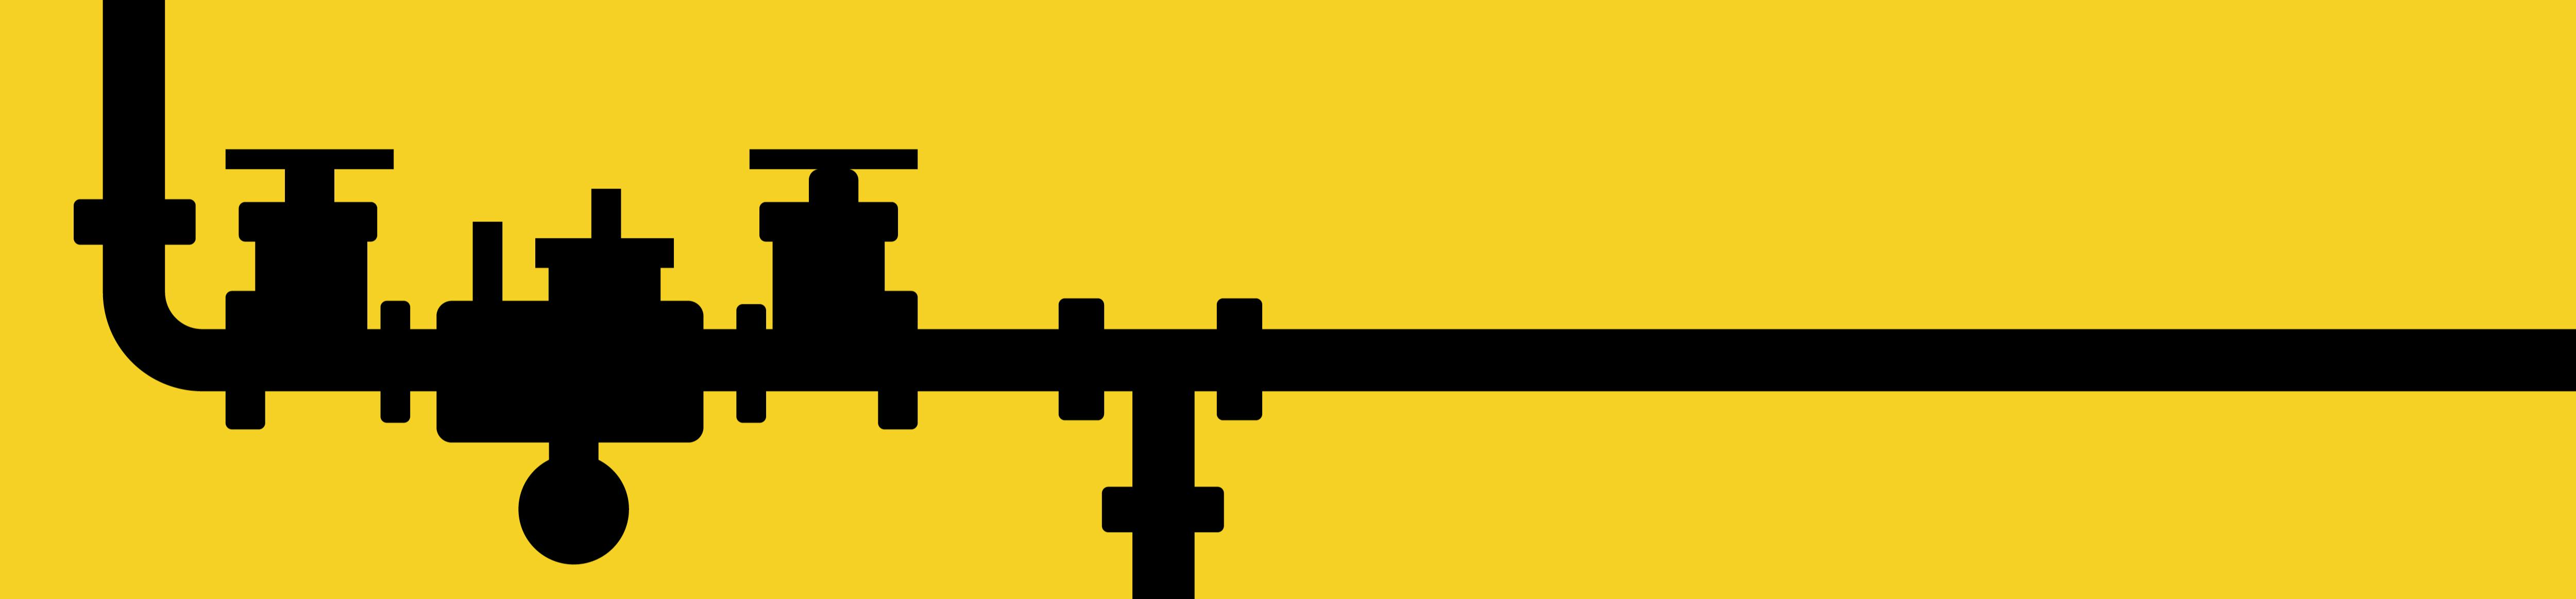 Black silhouette of a backflow device and piping against a bright yellow background